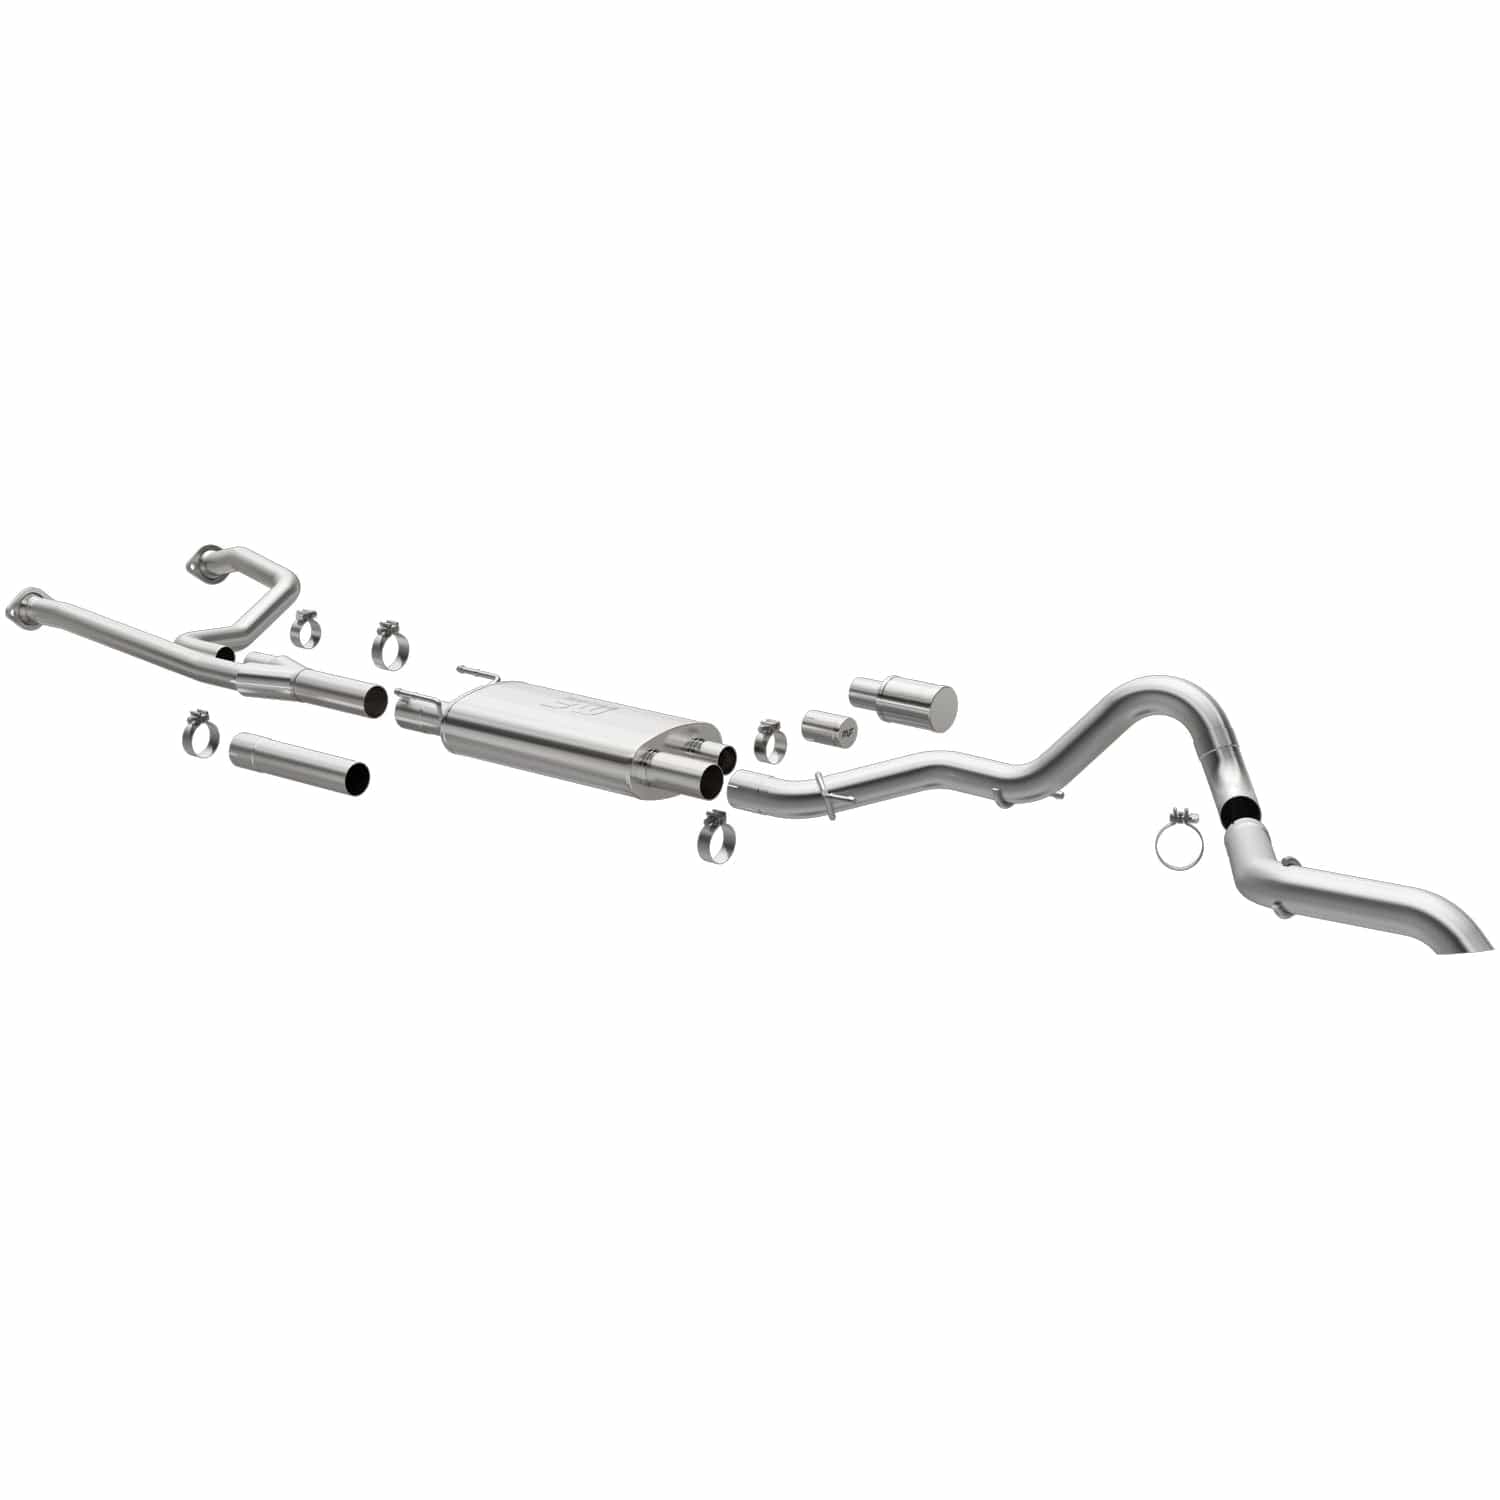 '22-23 Toyota Tundra Overland Series Cat-Back Performance Exhaust System MagnaFlow parts